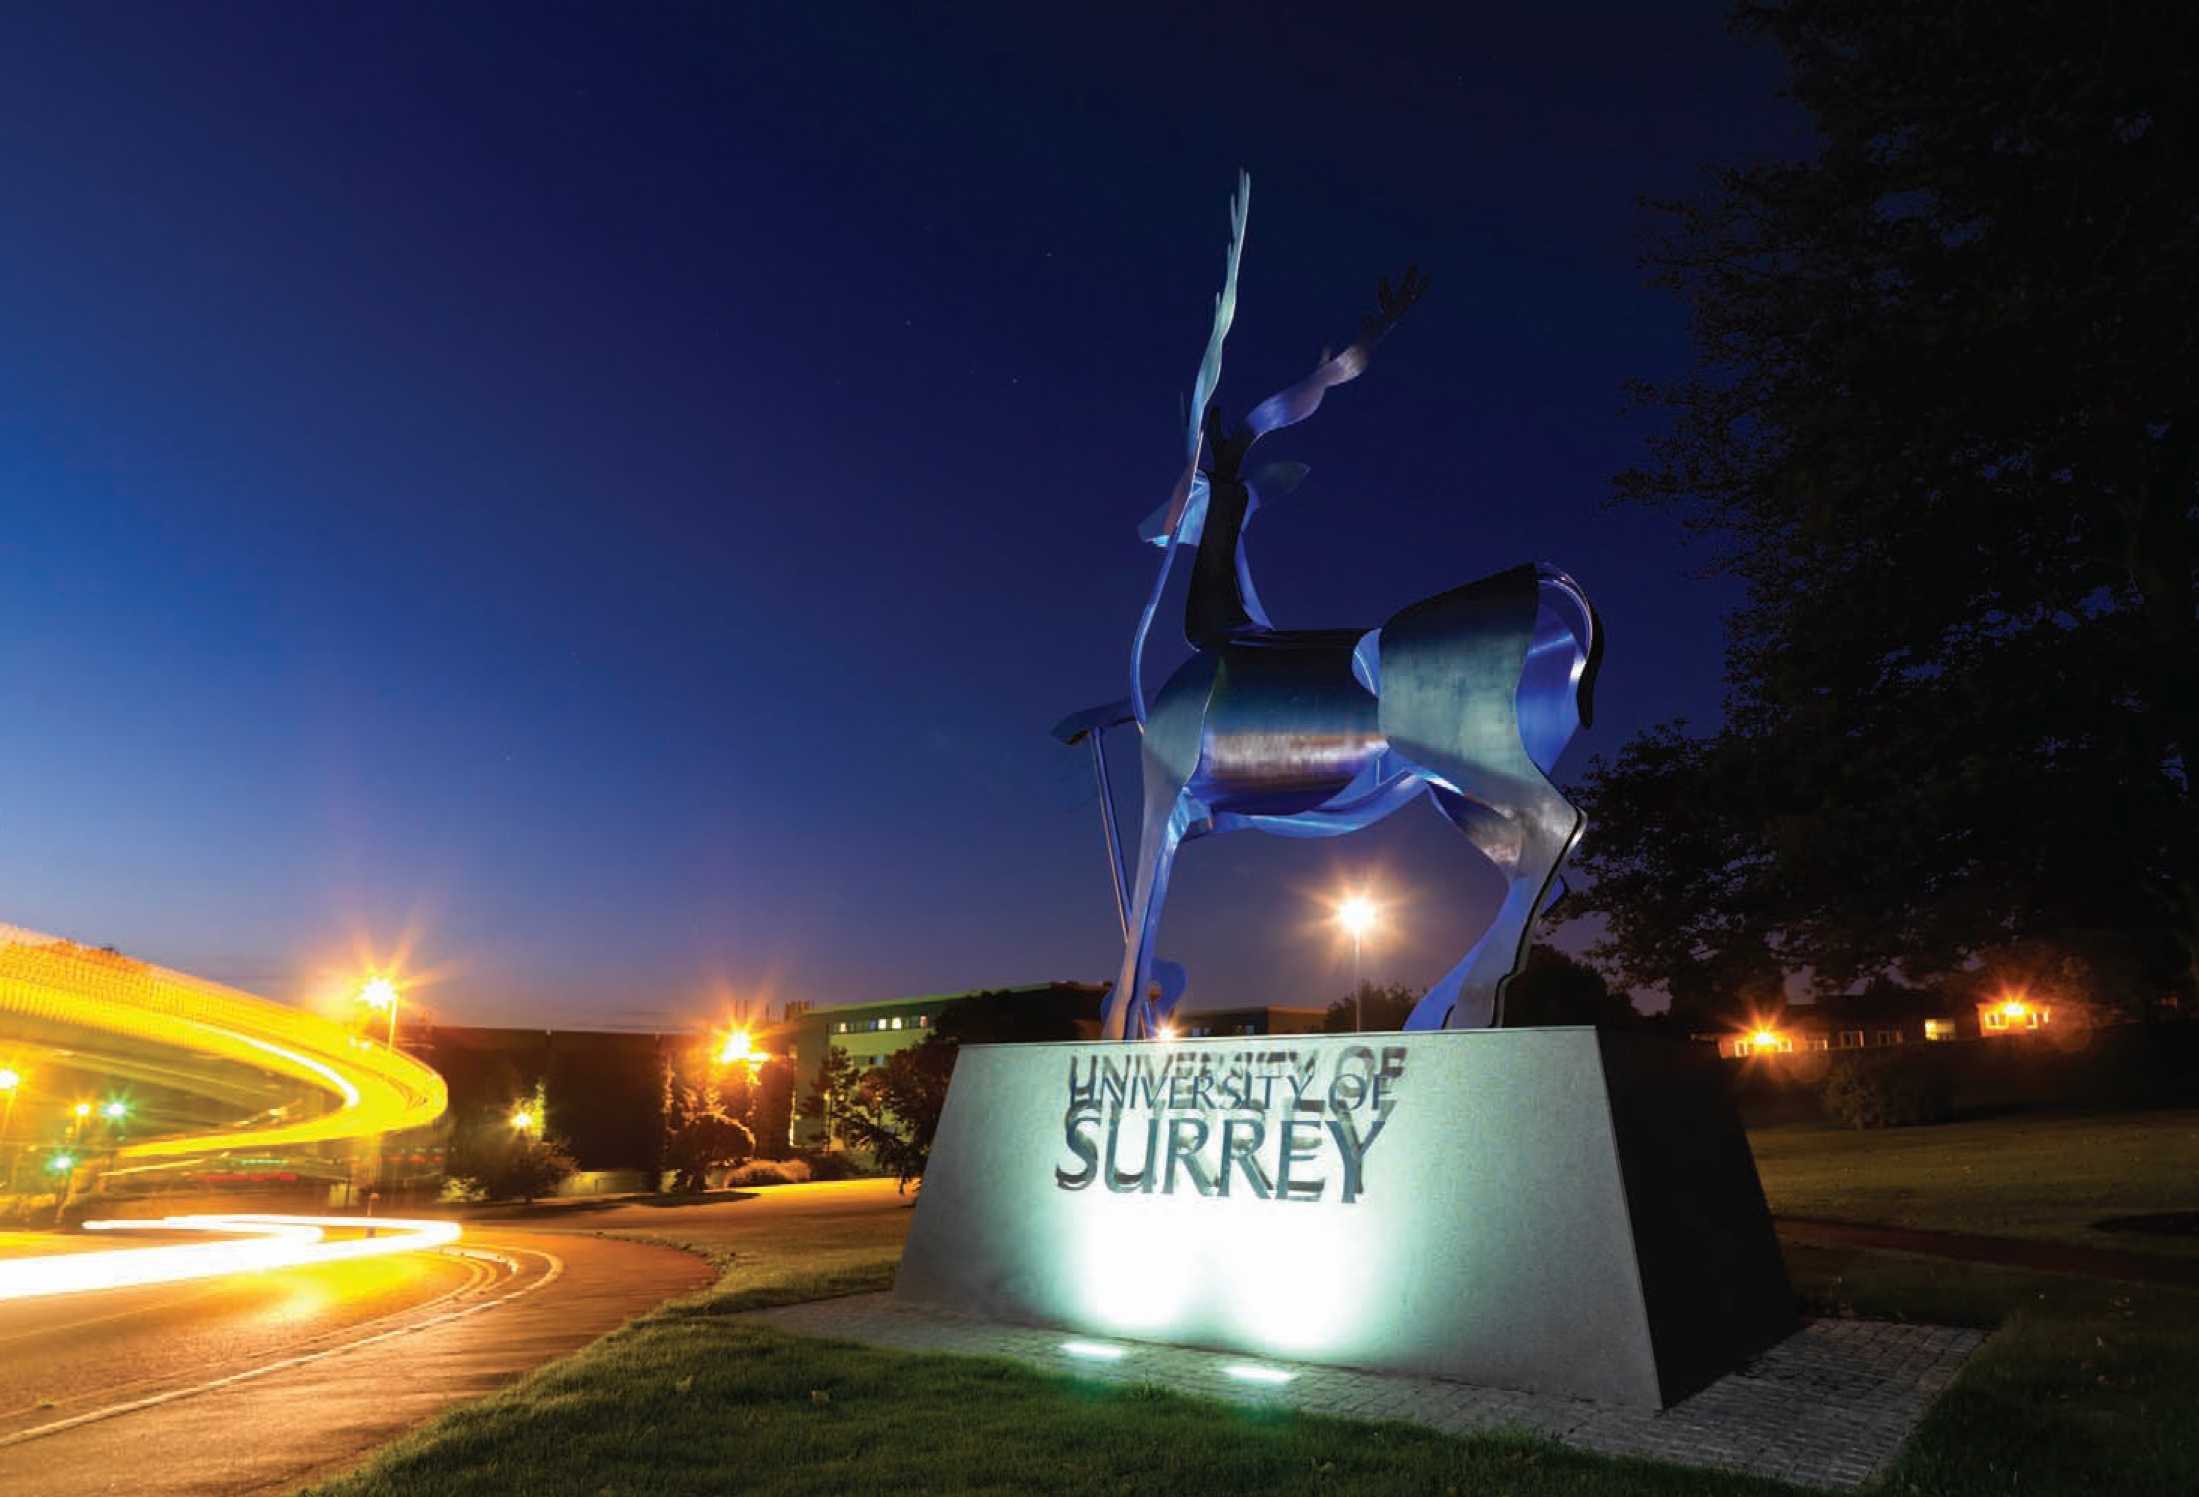 Shows entrance to University of Surrey